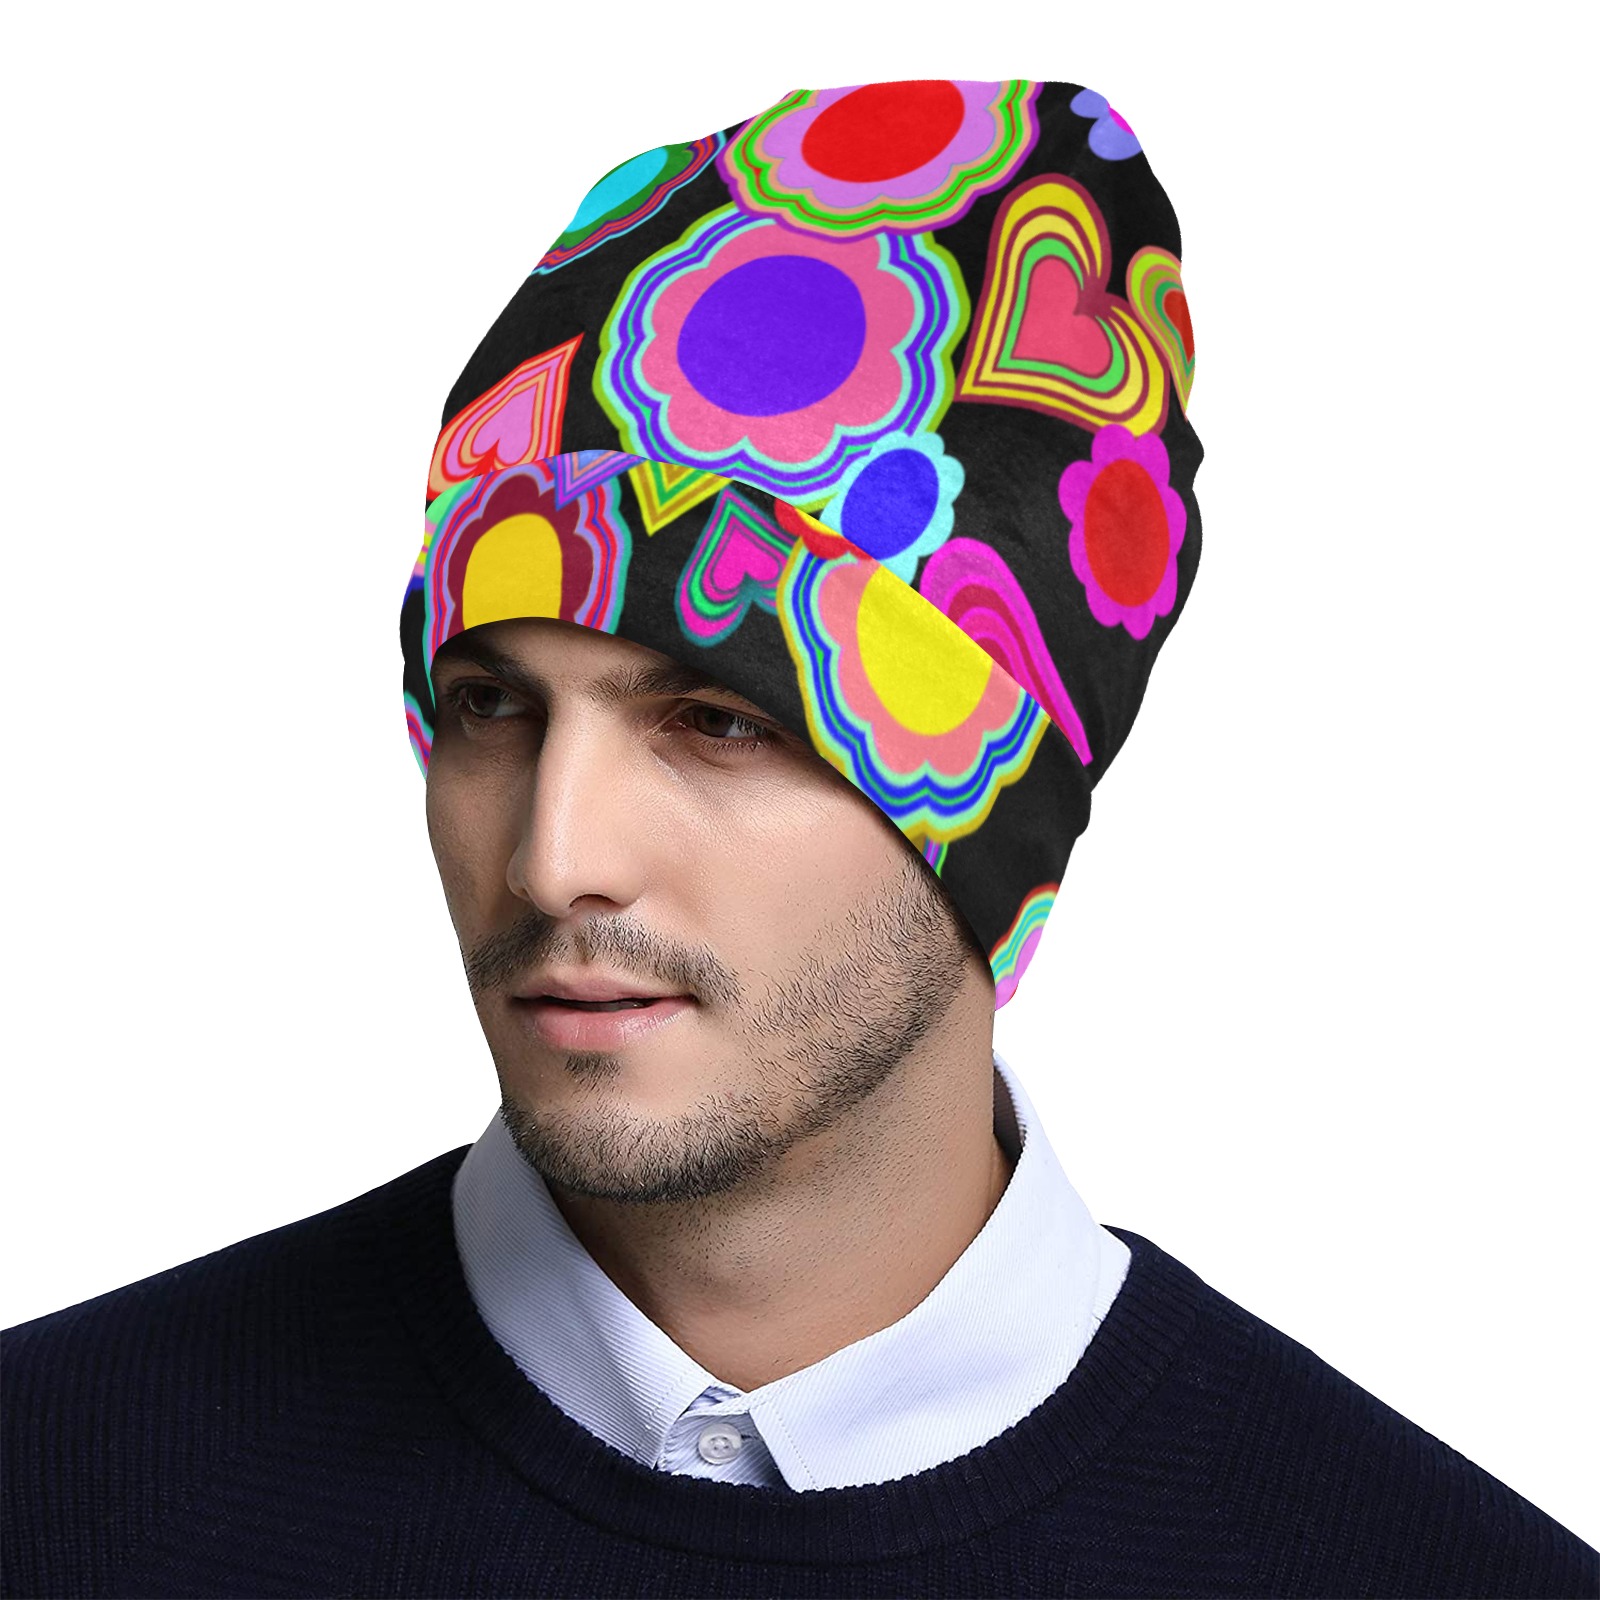 Groovy Hearts and Flowers Black All Over Print Beanie for Adults